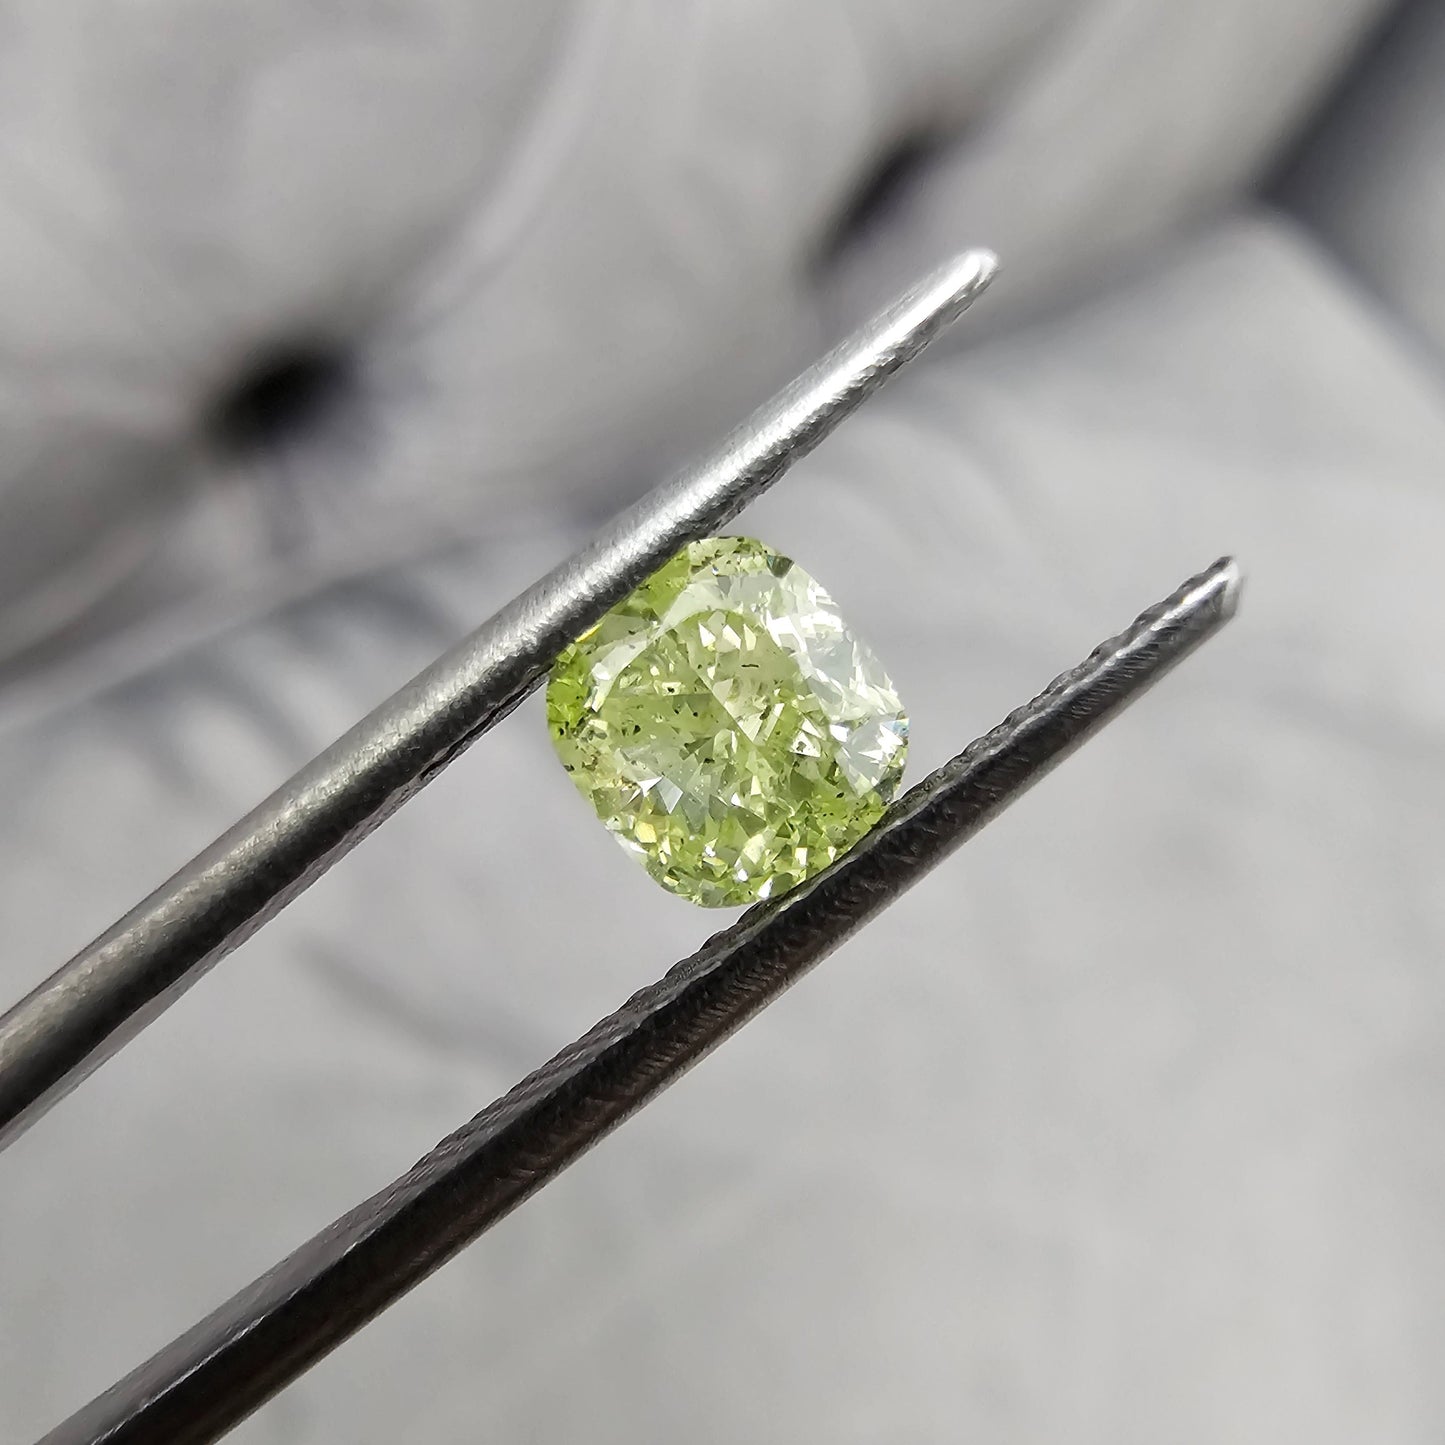 1.03 Carat  Fancy Intense Yellow-Green Color An exceptional LIME green color  Strong Green Fluorescence - Ultra Rare! Cushion Cut Diamond  I1 Clarity - Eye Clean GIA Certified Diamond